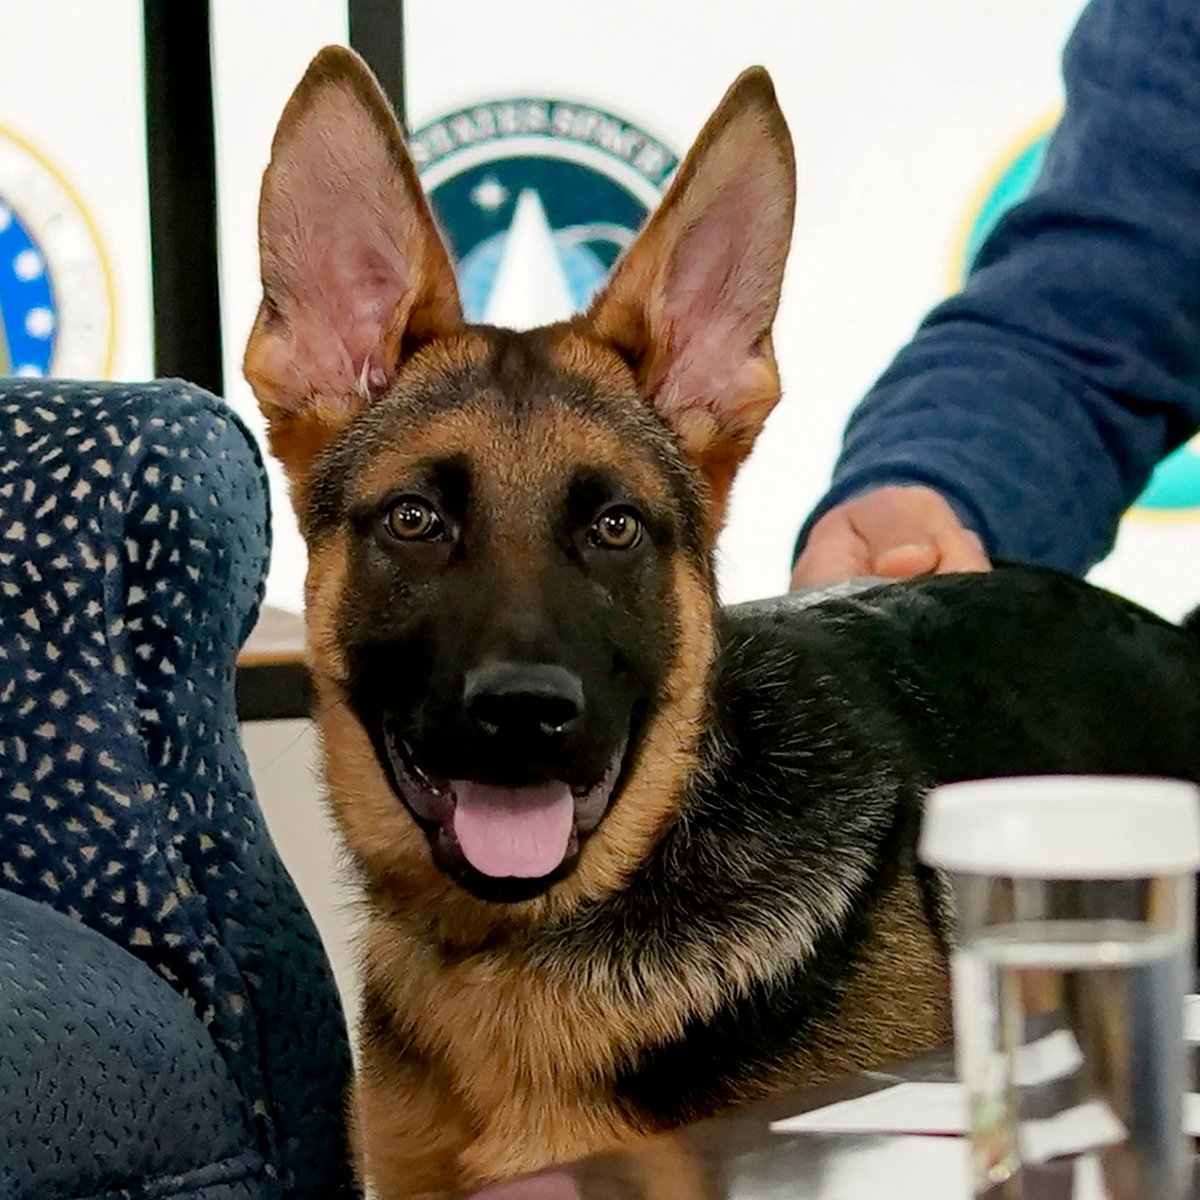 . Hey America, if you are #TeamCricket, President Biden is the only choice in 2024 Even though there were problems with the German Shepherds, none of them were shot in a gravel pit... . . . there is always another solution. Live long Major... Live long Commander ! 🐾 💙 🐾